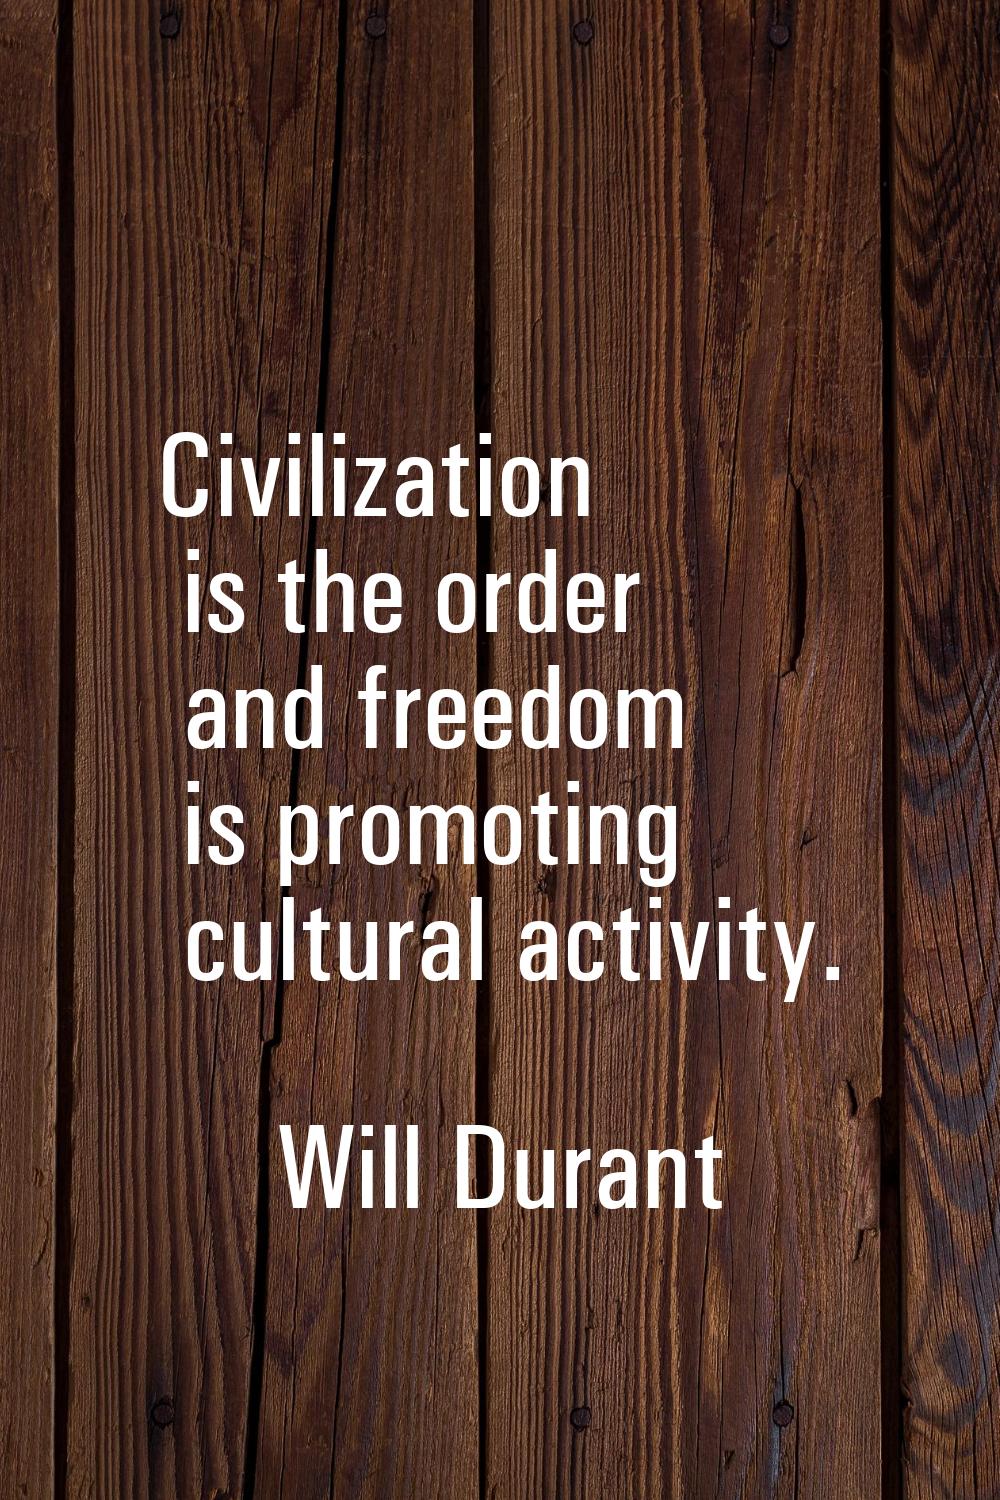 Civilization is the order and freedom is promoting cultural activity.